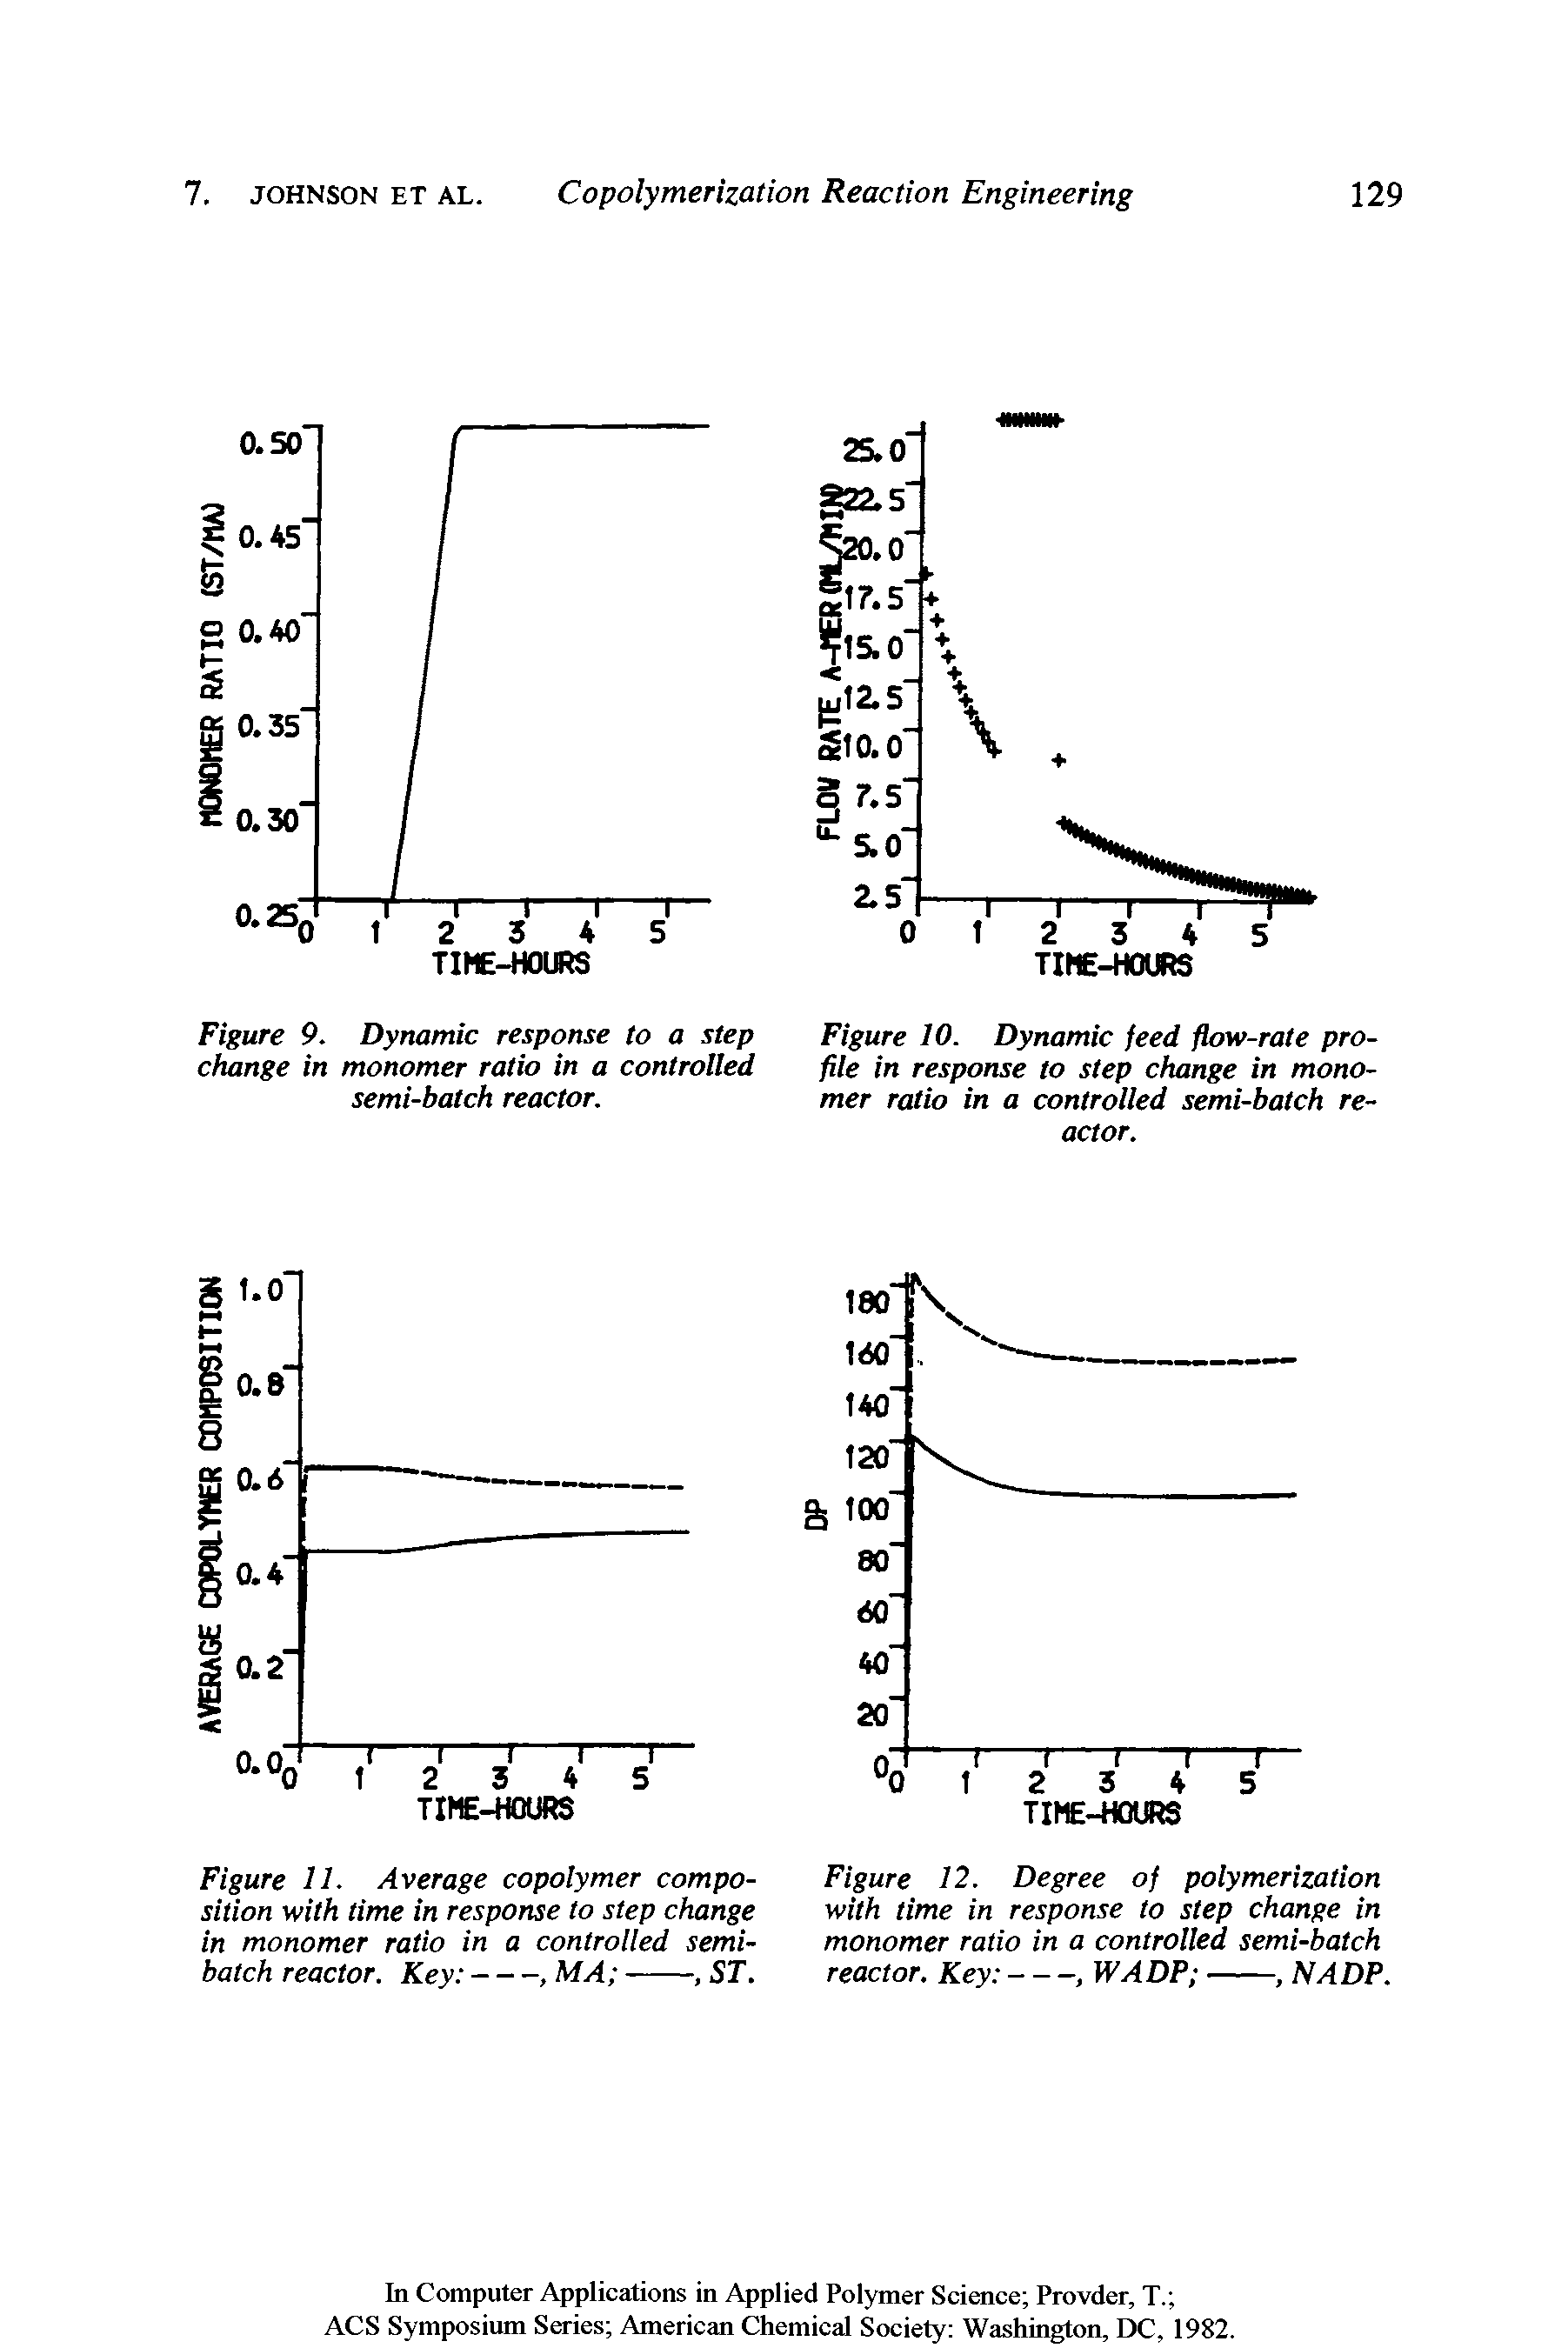 Figure 12. Degree of polymerization with time in response to step change in monomer ratio in a controlled semi-batch reactor. Key -----, WADP -------, NADP.